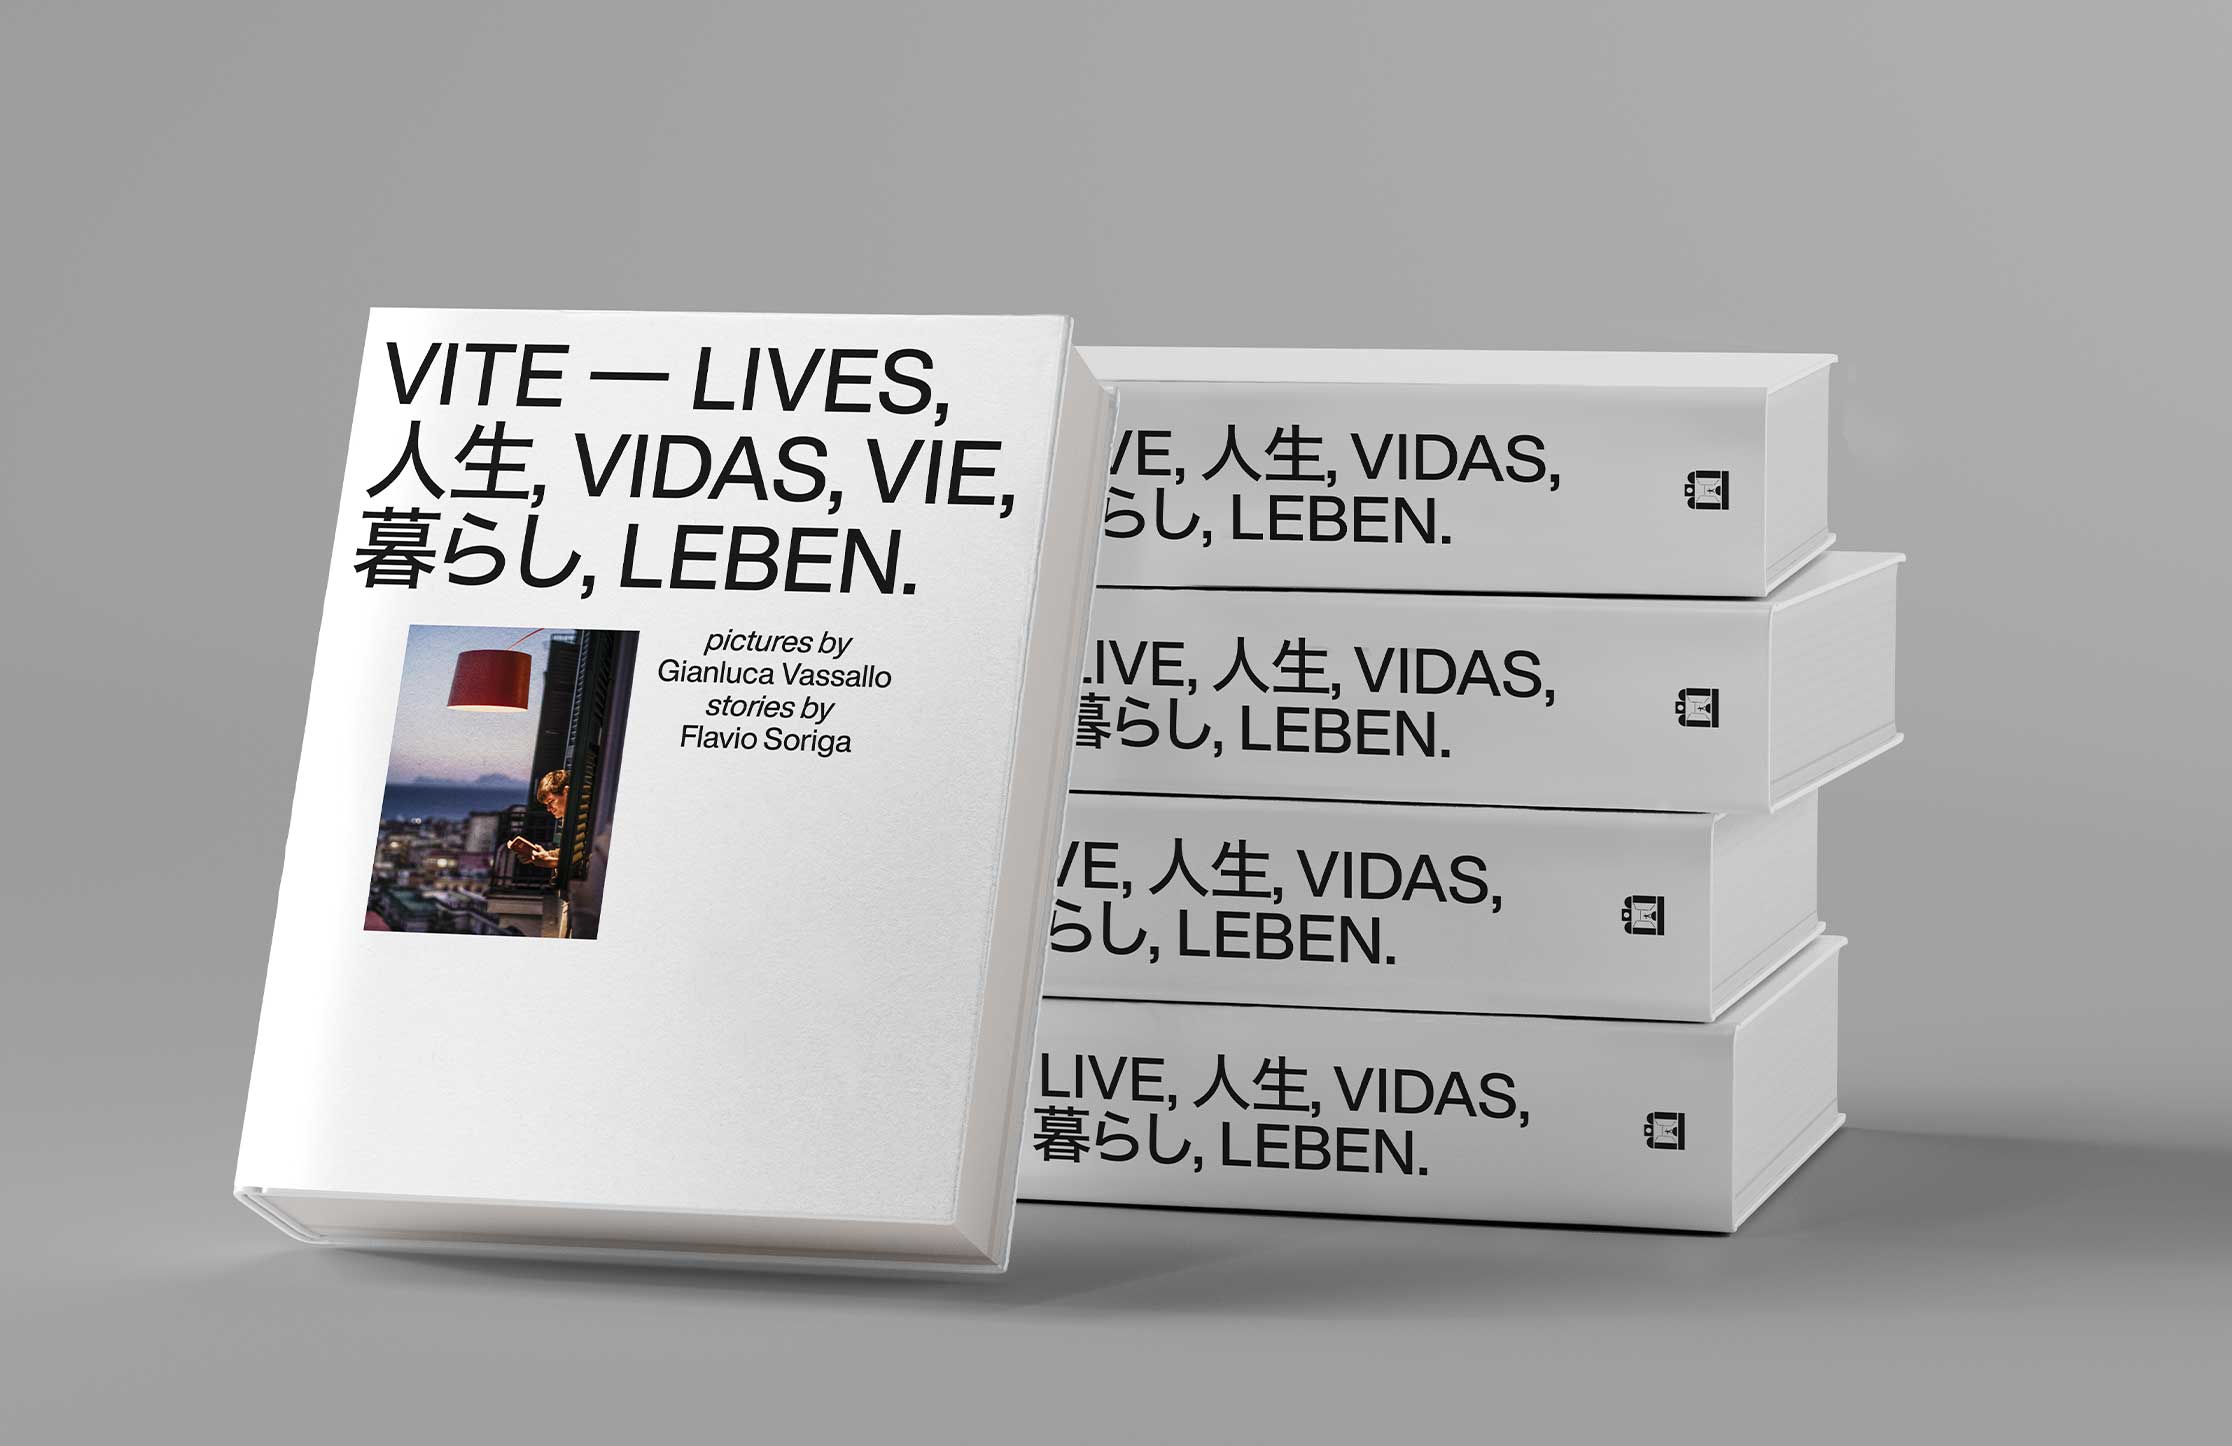 VITE (LIVES) and its stories, now in bookstores